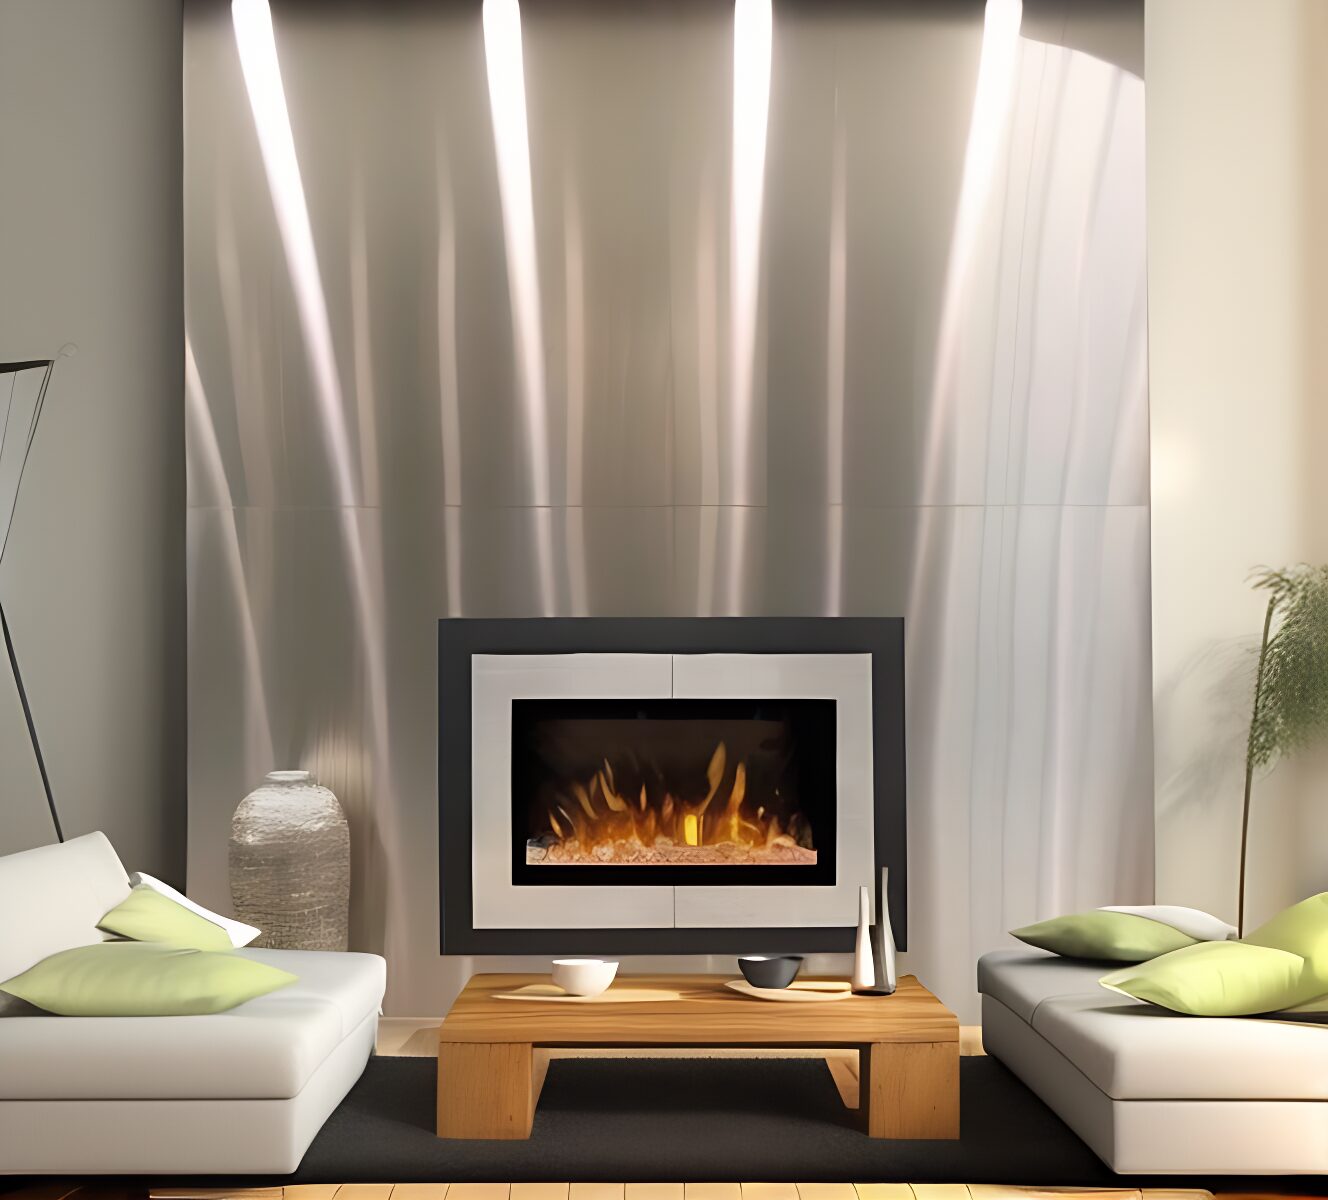 fireplace surround wall made of stainless steel